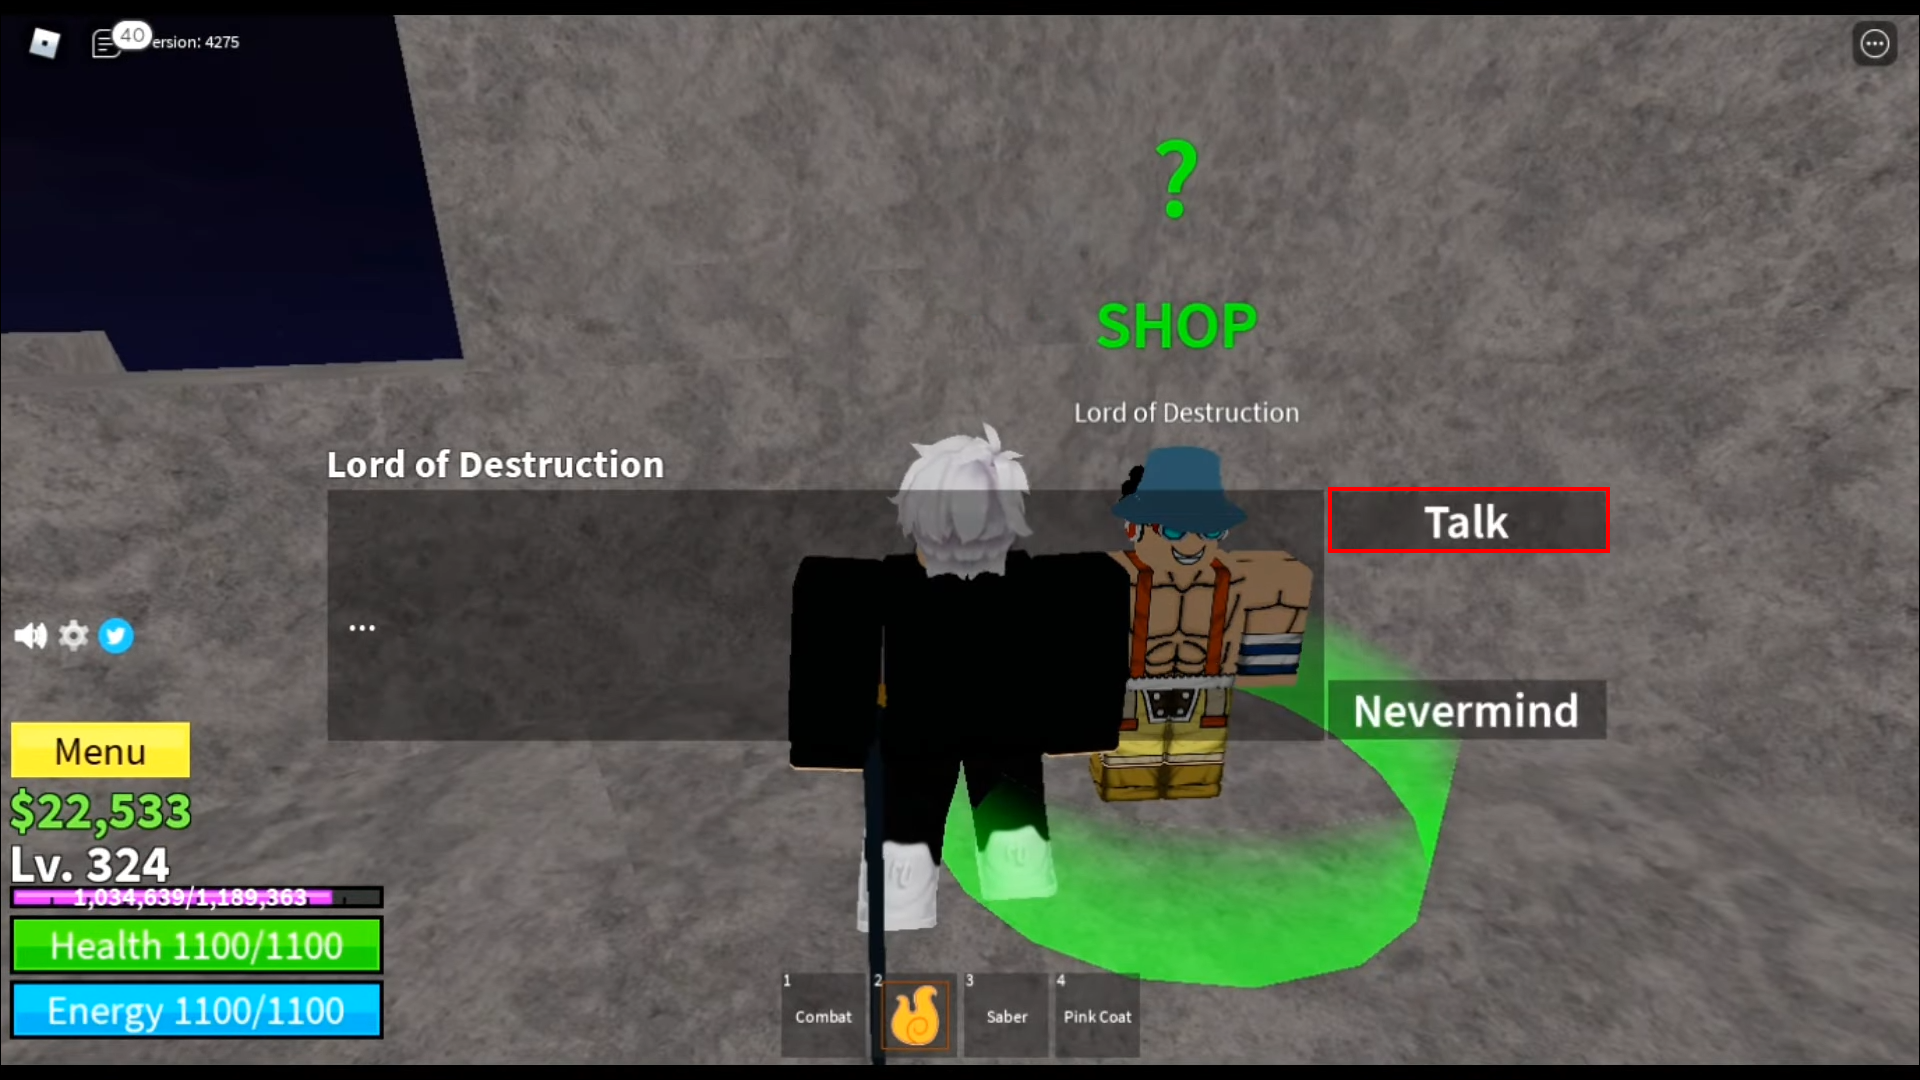 How To Train Observation Haki Blox Fruits